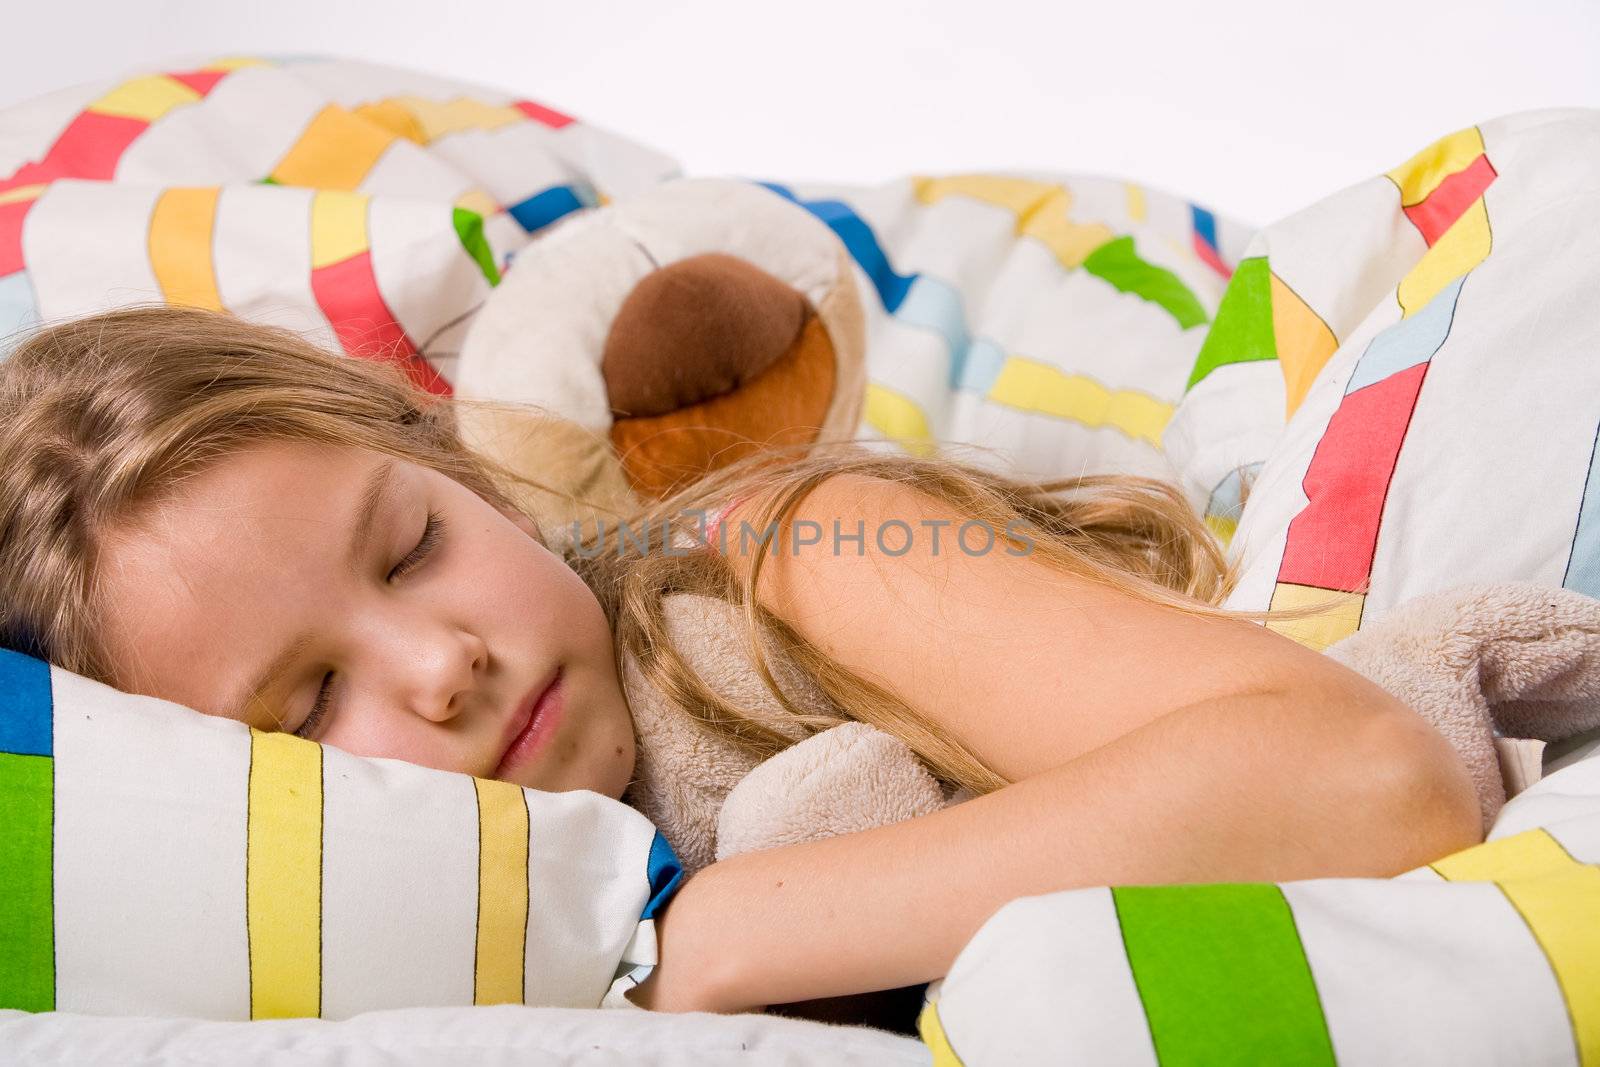 Sleeping young cute child in a colorful bed